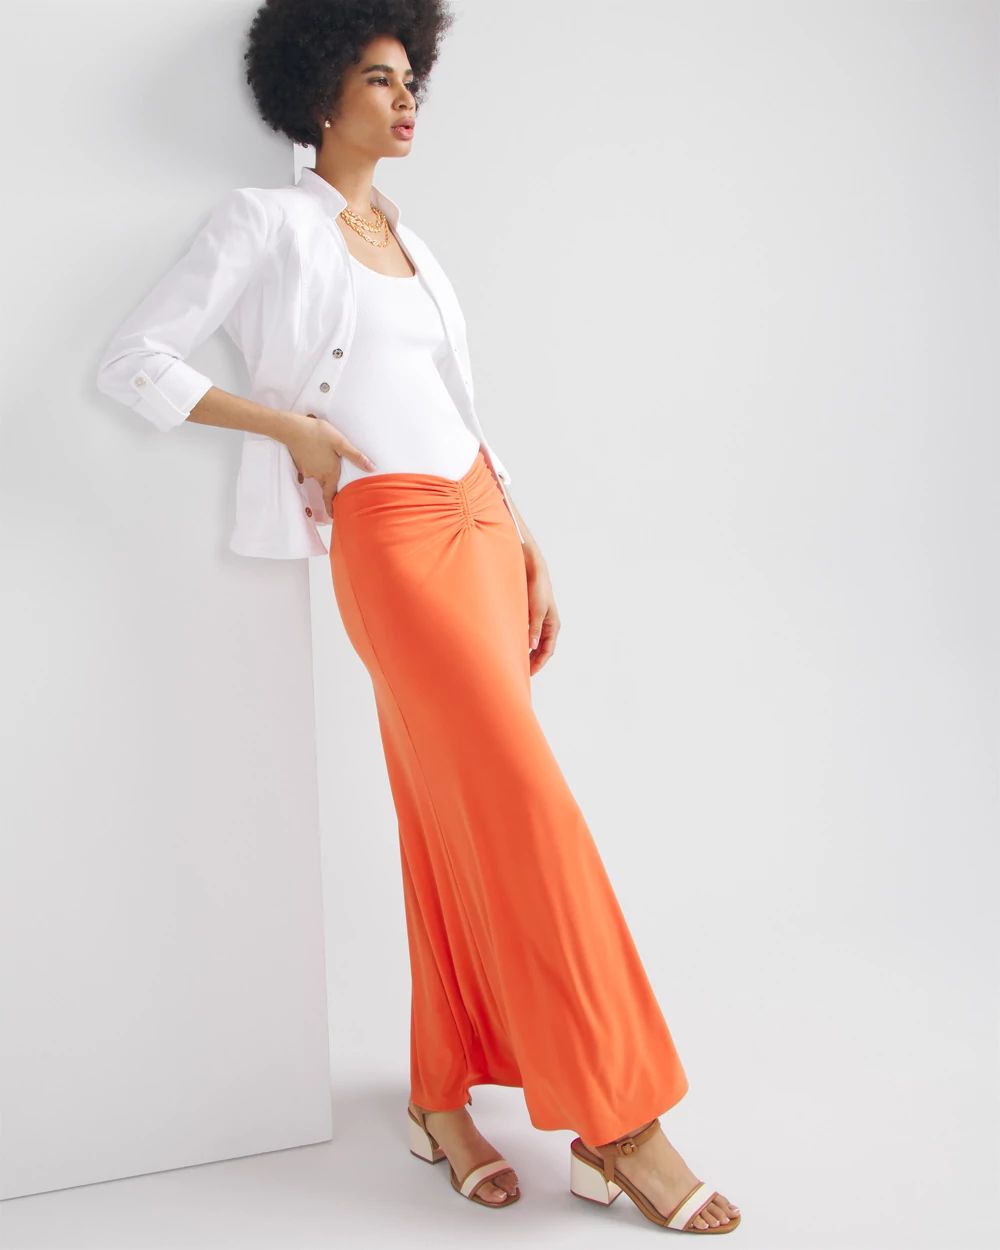 Ruched Maxi Skirt click to view larger image.